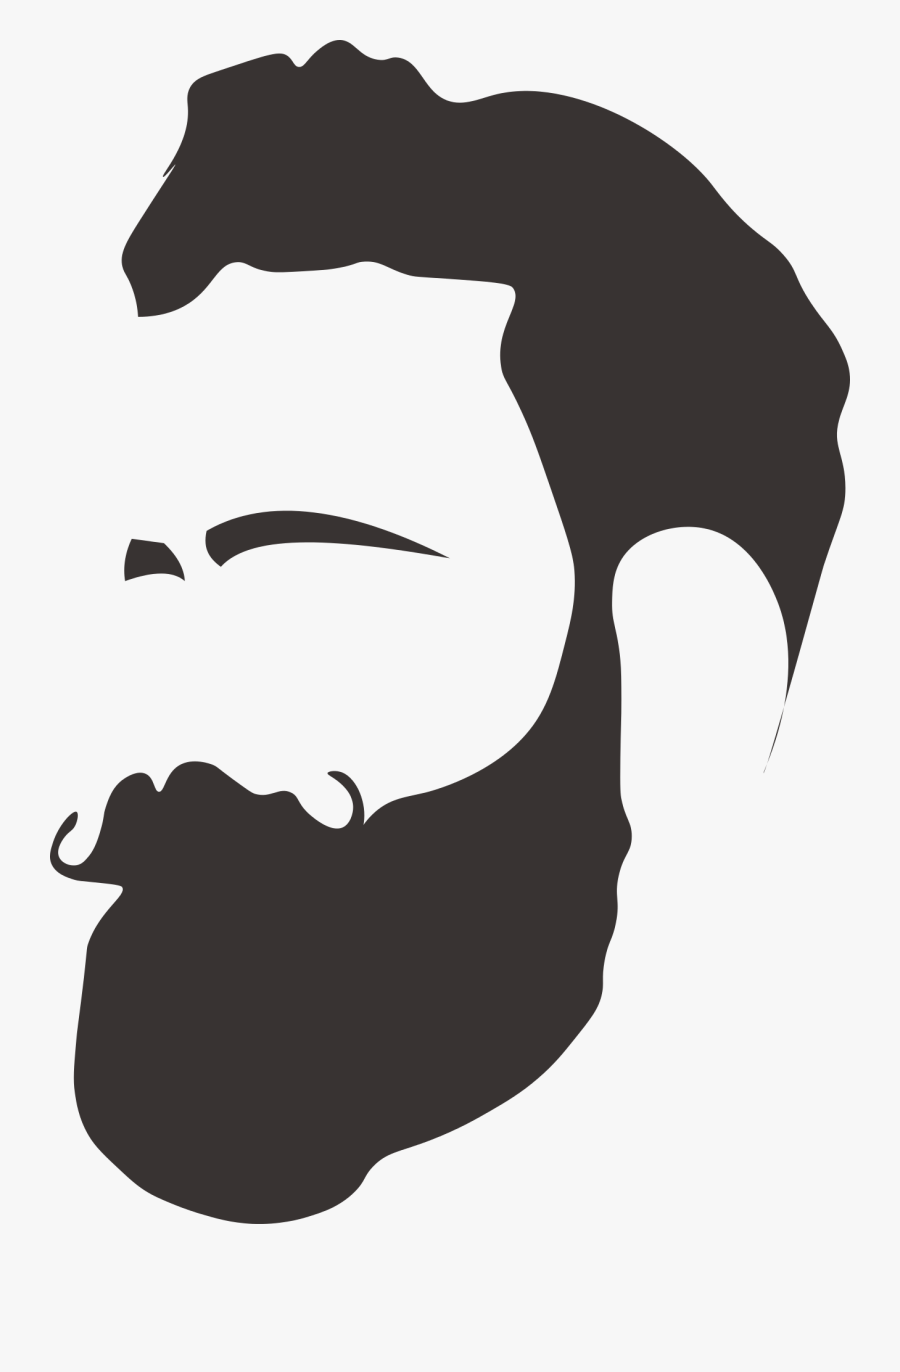 Beard Man Icon Png, Transparent Clipart